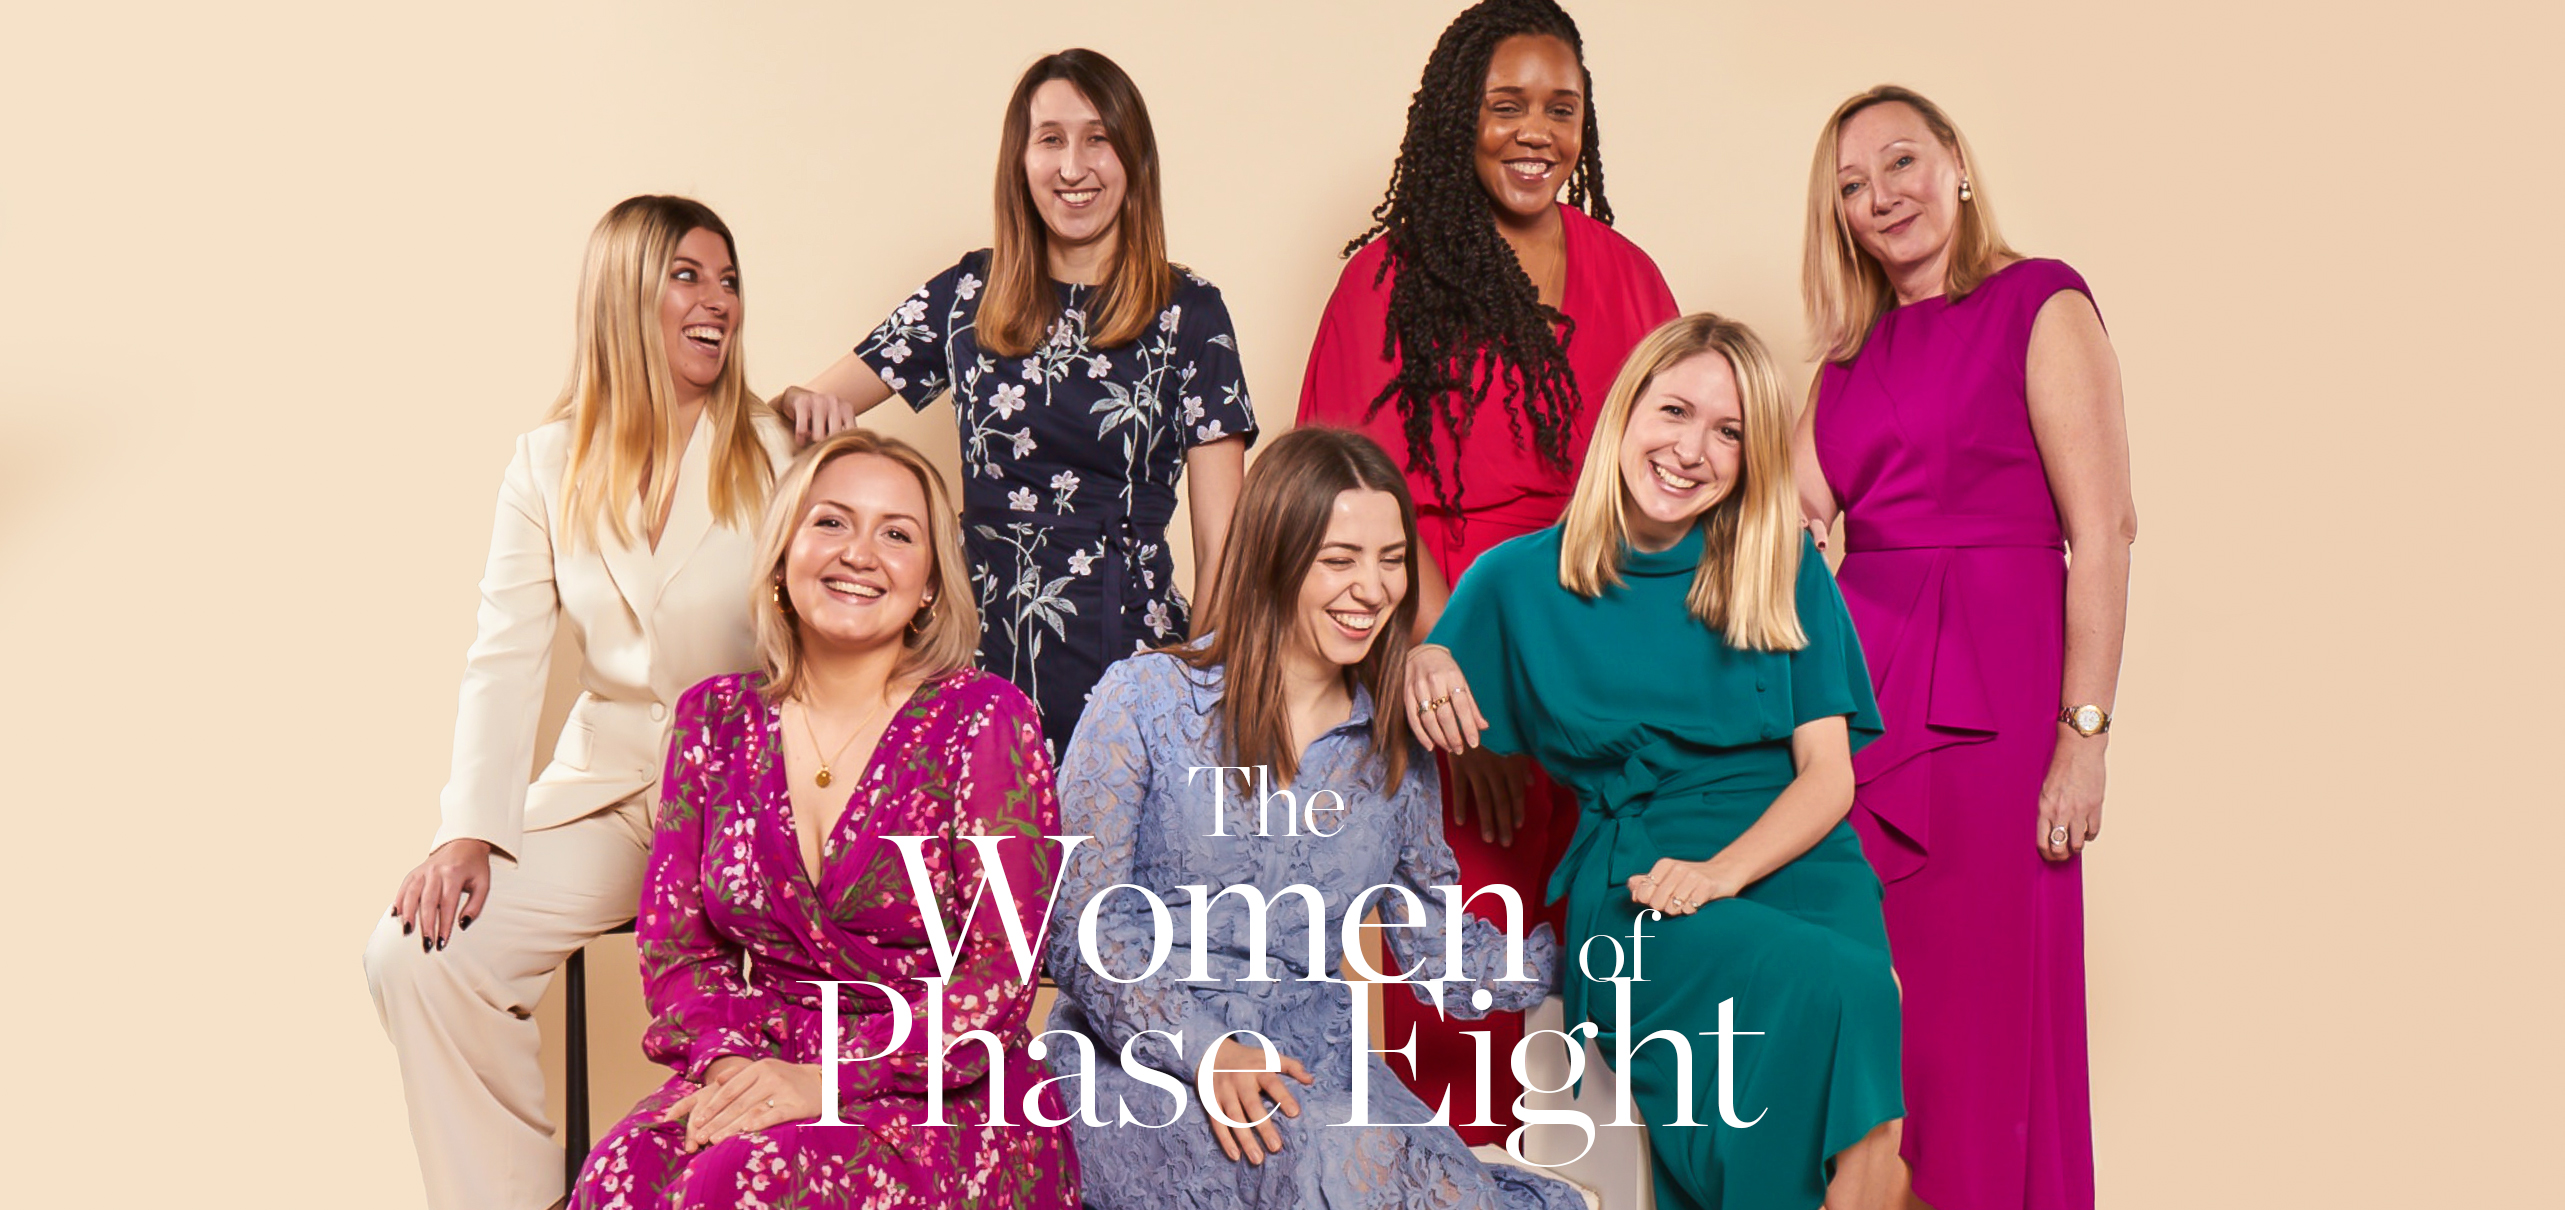 The women of Phase Eight